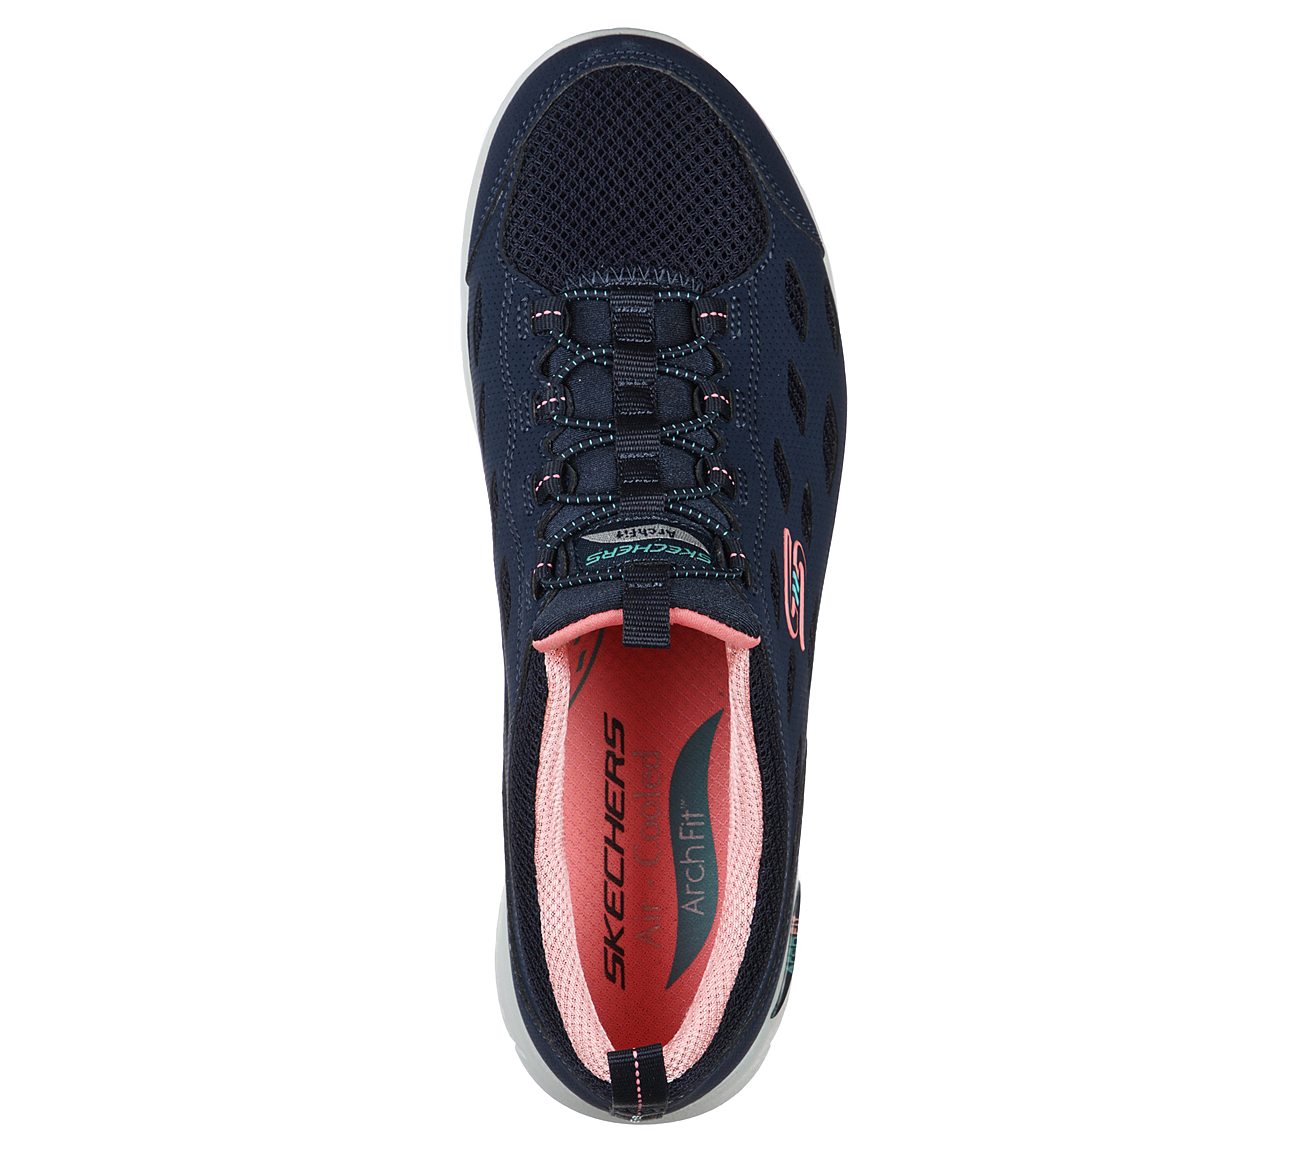 ARCH FIT REFINE, NAVY/CORAL Footwear Top View